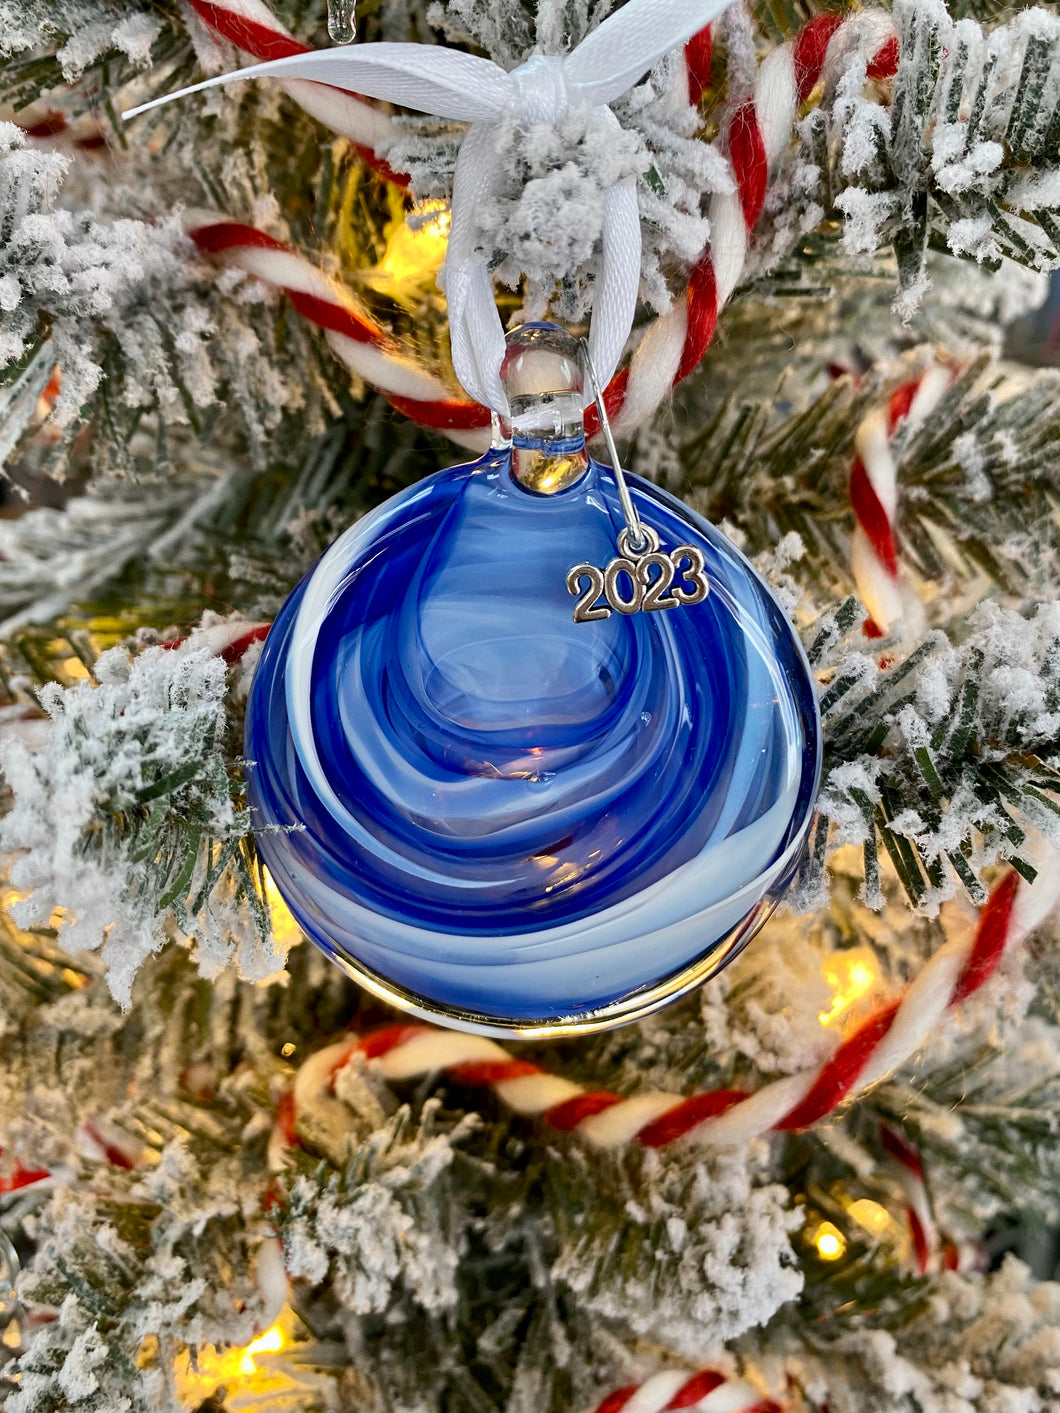 Cobalt blue and white round flat glass ornament